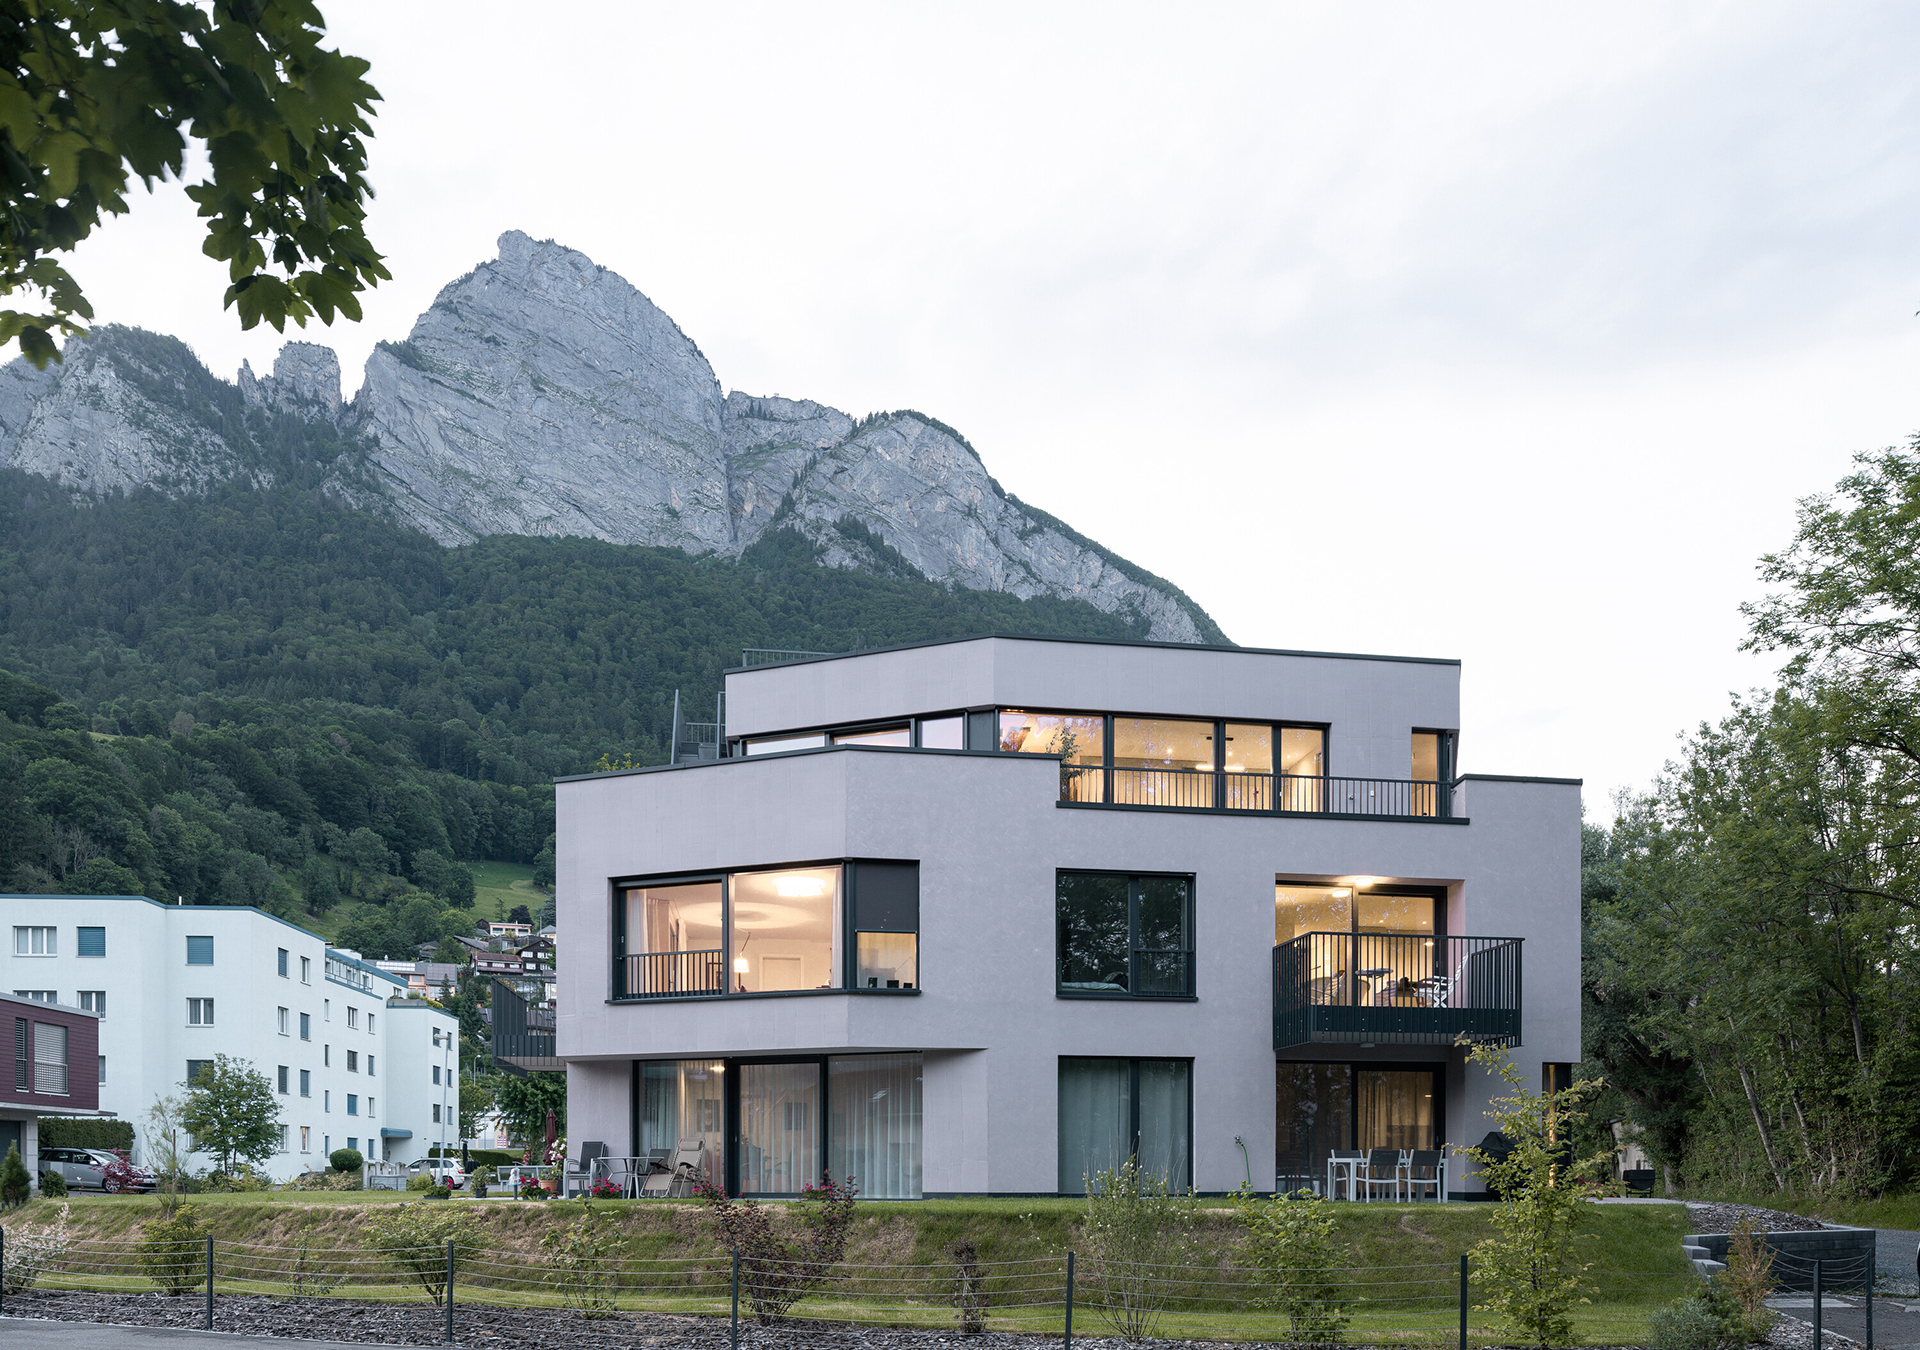 The Swiss mountains define the concept and design of Residenz Eisenerz